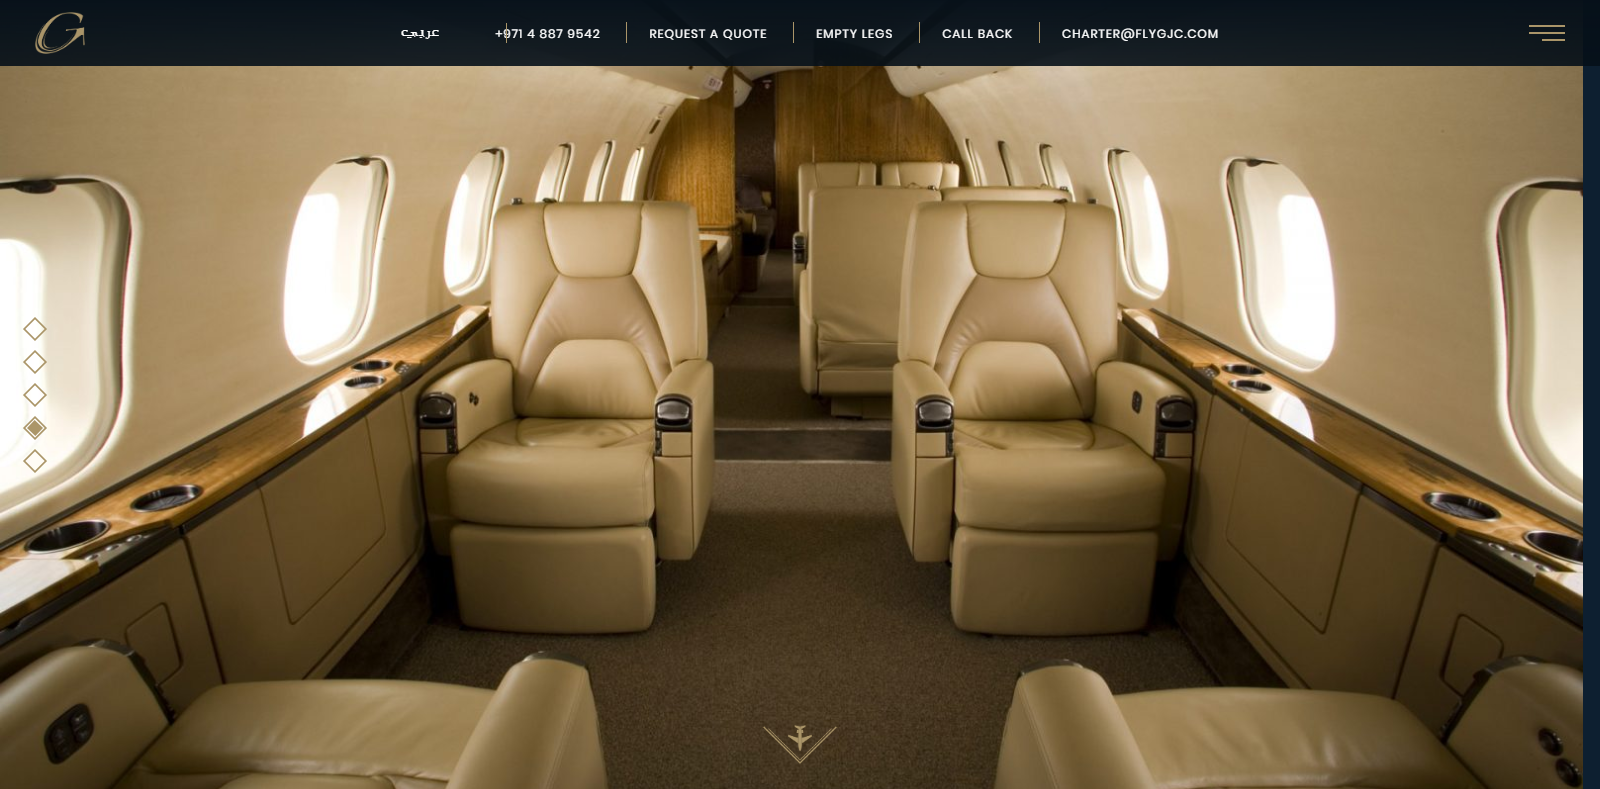 A WordPress website developed by Advanced Systemics for Global Jets, Dubai